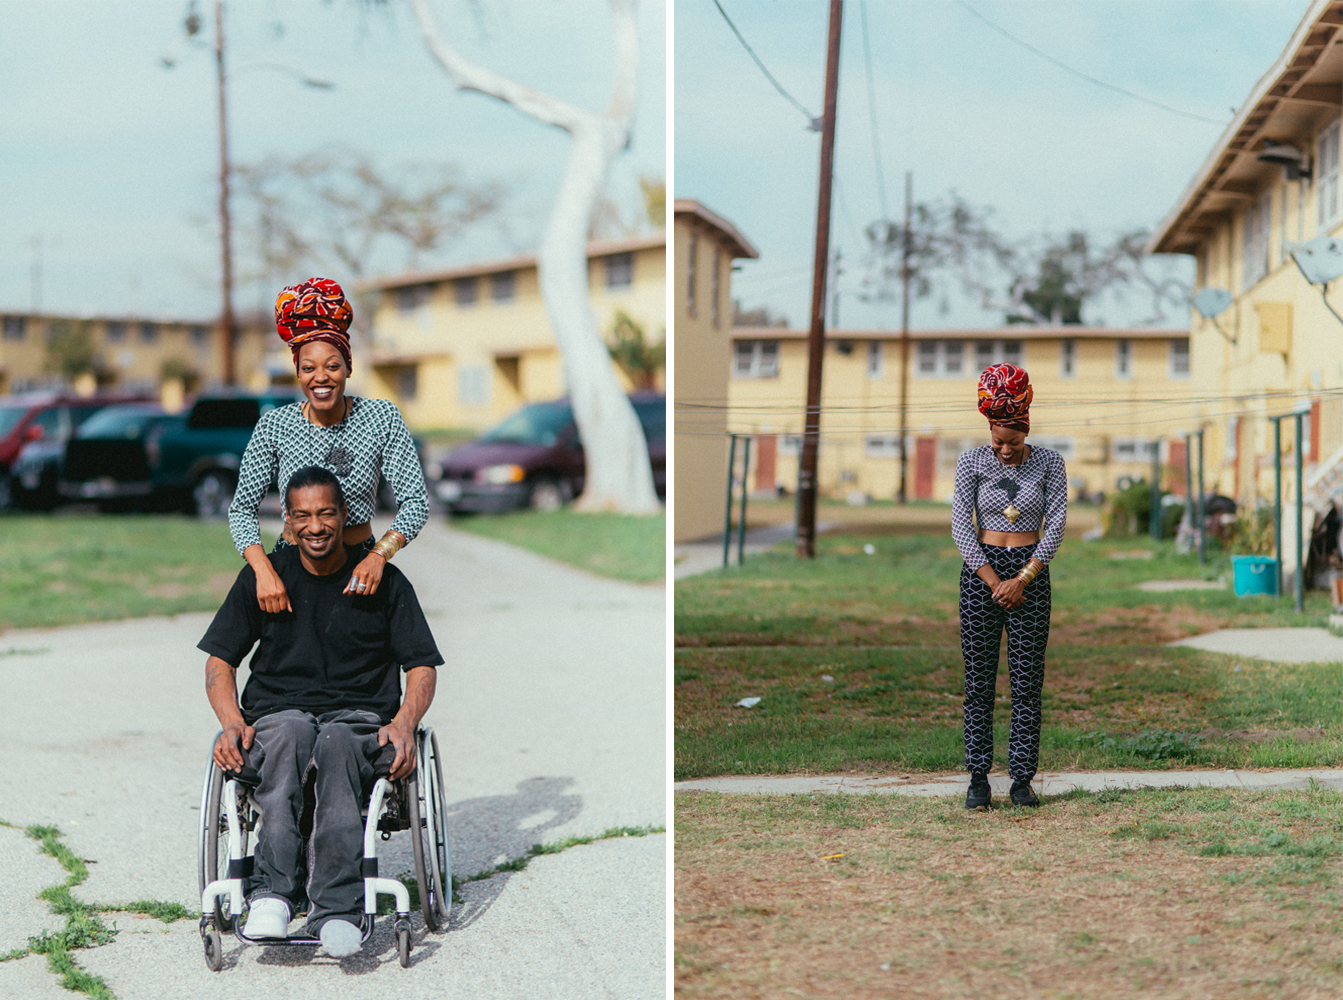  (LEFT)&nbsp;BRITTSENSE PHOTOGRAPHED WITH MARIO IN (WATTS) LOS ANGELES, CALIFORNIA BY © KAYLA REEFER, SUSPEND MAGAZINE 